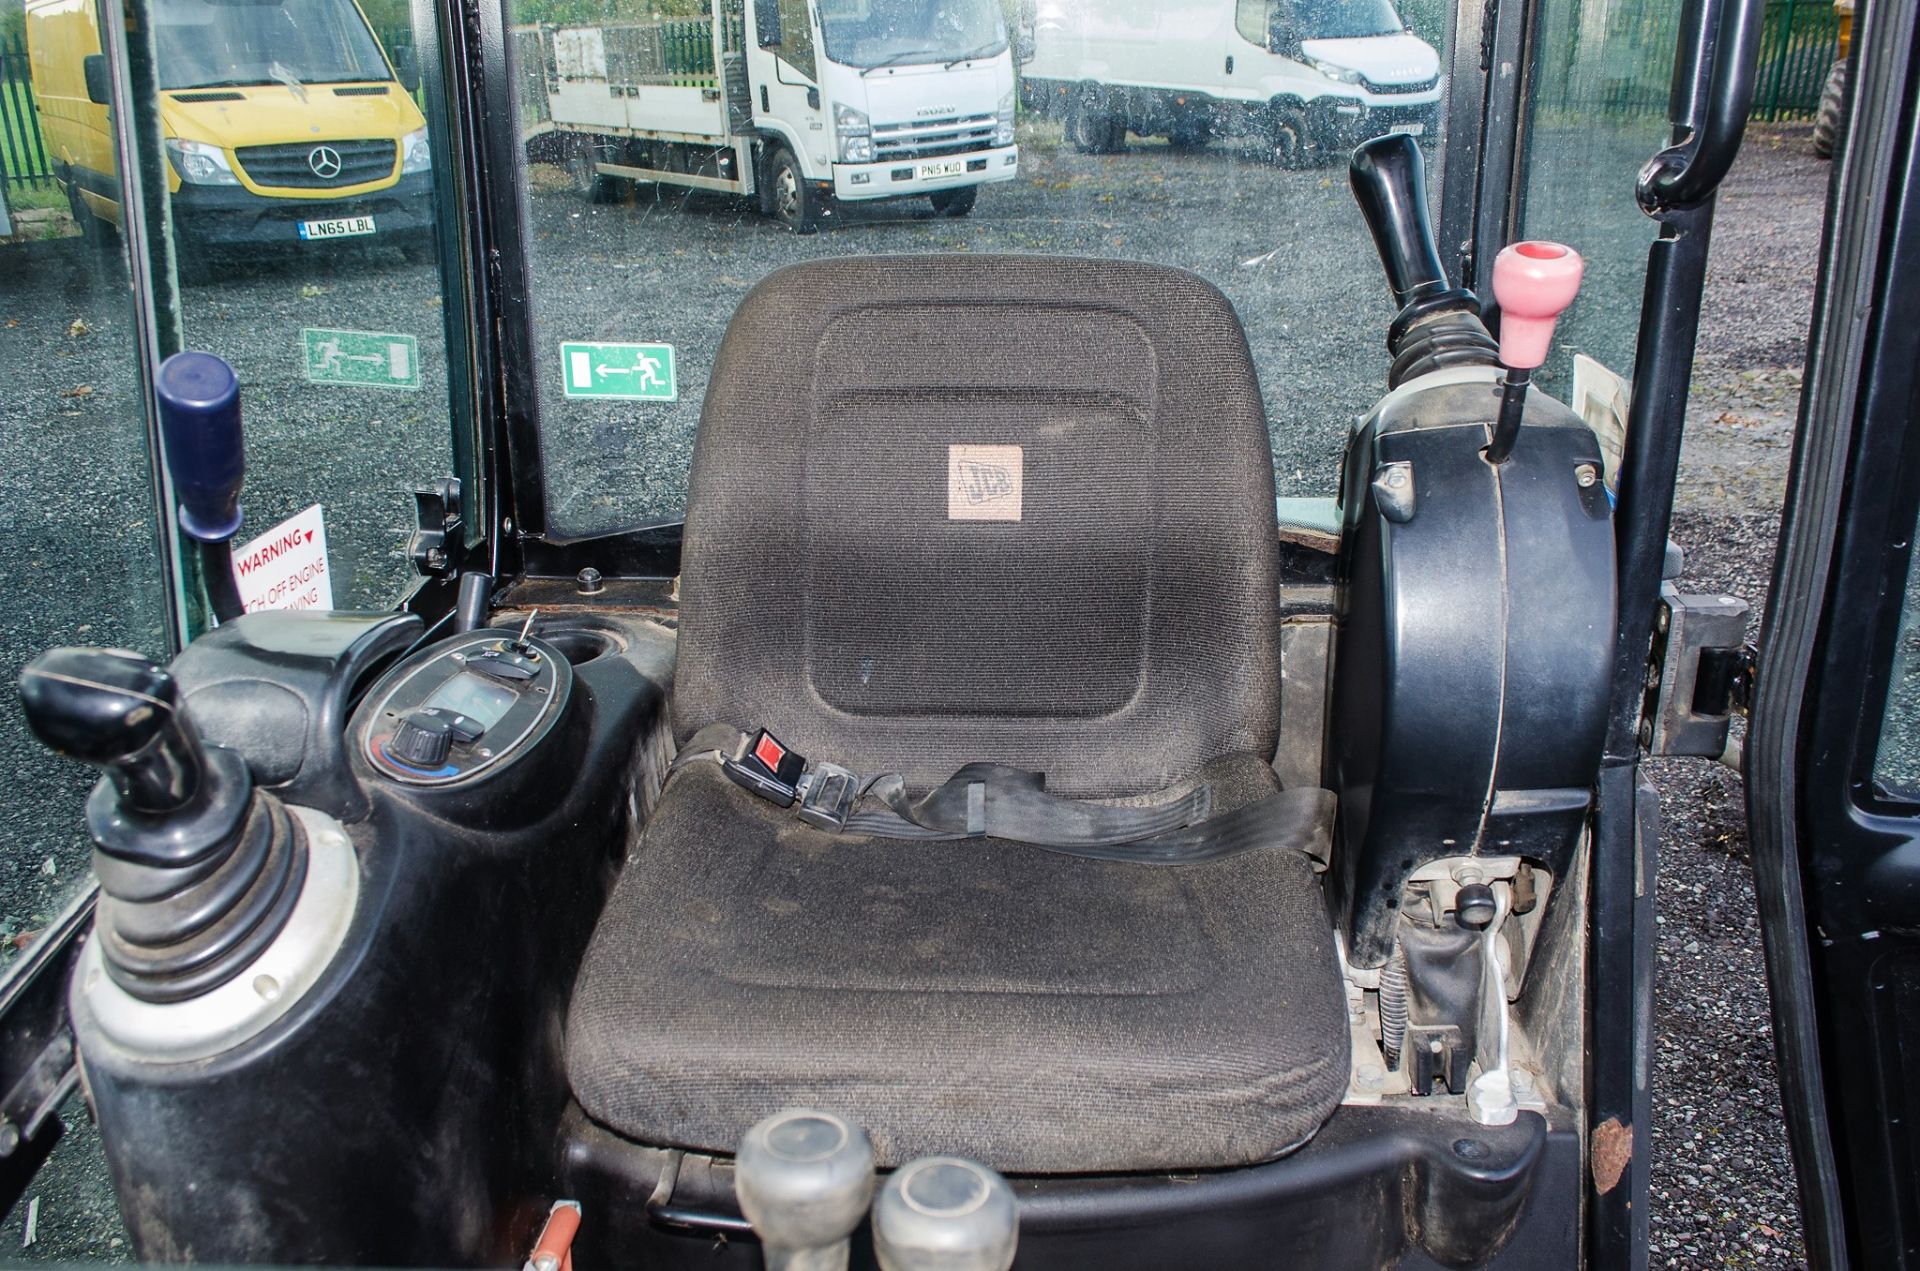 JCB 8016 CTS 1.5 tonne rubber tracked mini excavator Year: 2013 S/N: 2071390 Recorded Hours: 2198 - Image 18 of 20